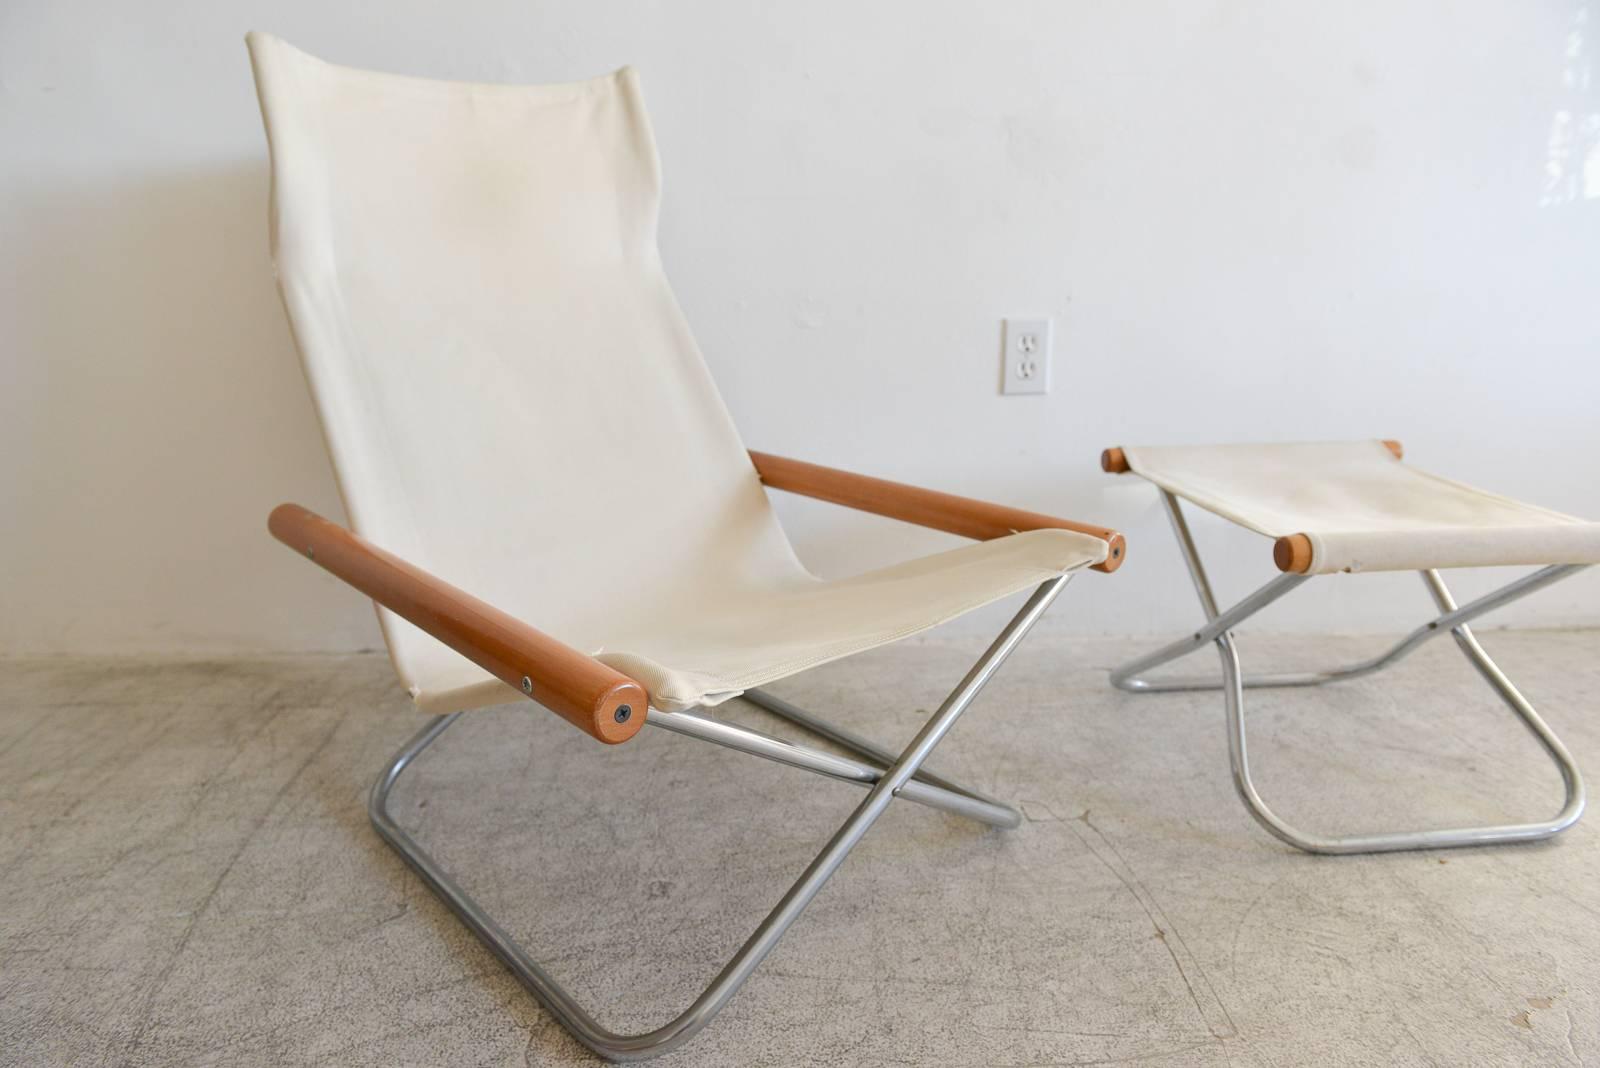 NY chair by Takeshi Nii, Japan, circa 1958. Includes rare ottoman. Washable canvas in good condition, minor wear and unravelling on one seam. Chrome tubular frame.

Available to see in our Showroom, 361 Old Newport Blvd, Newport Beach,